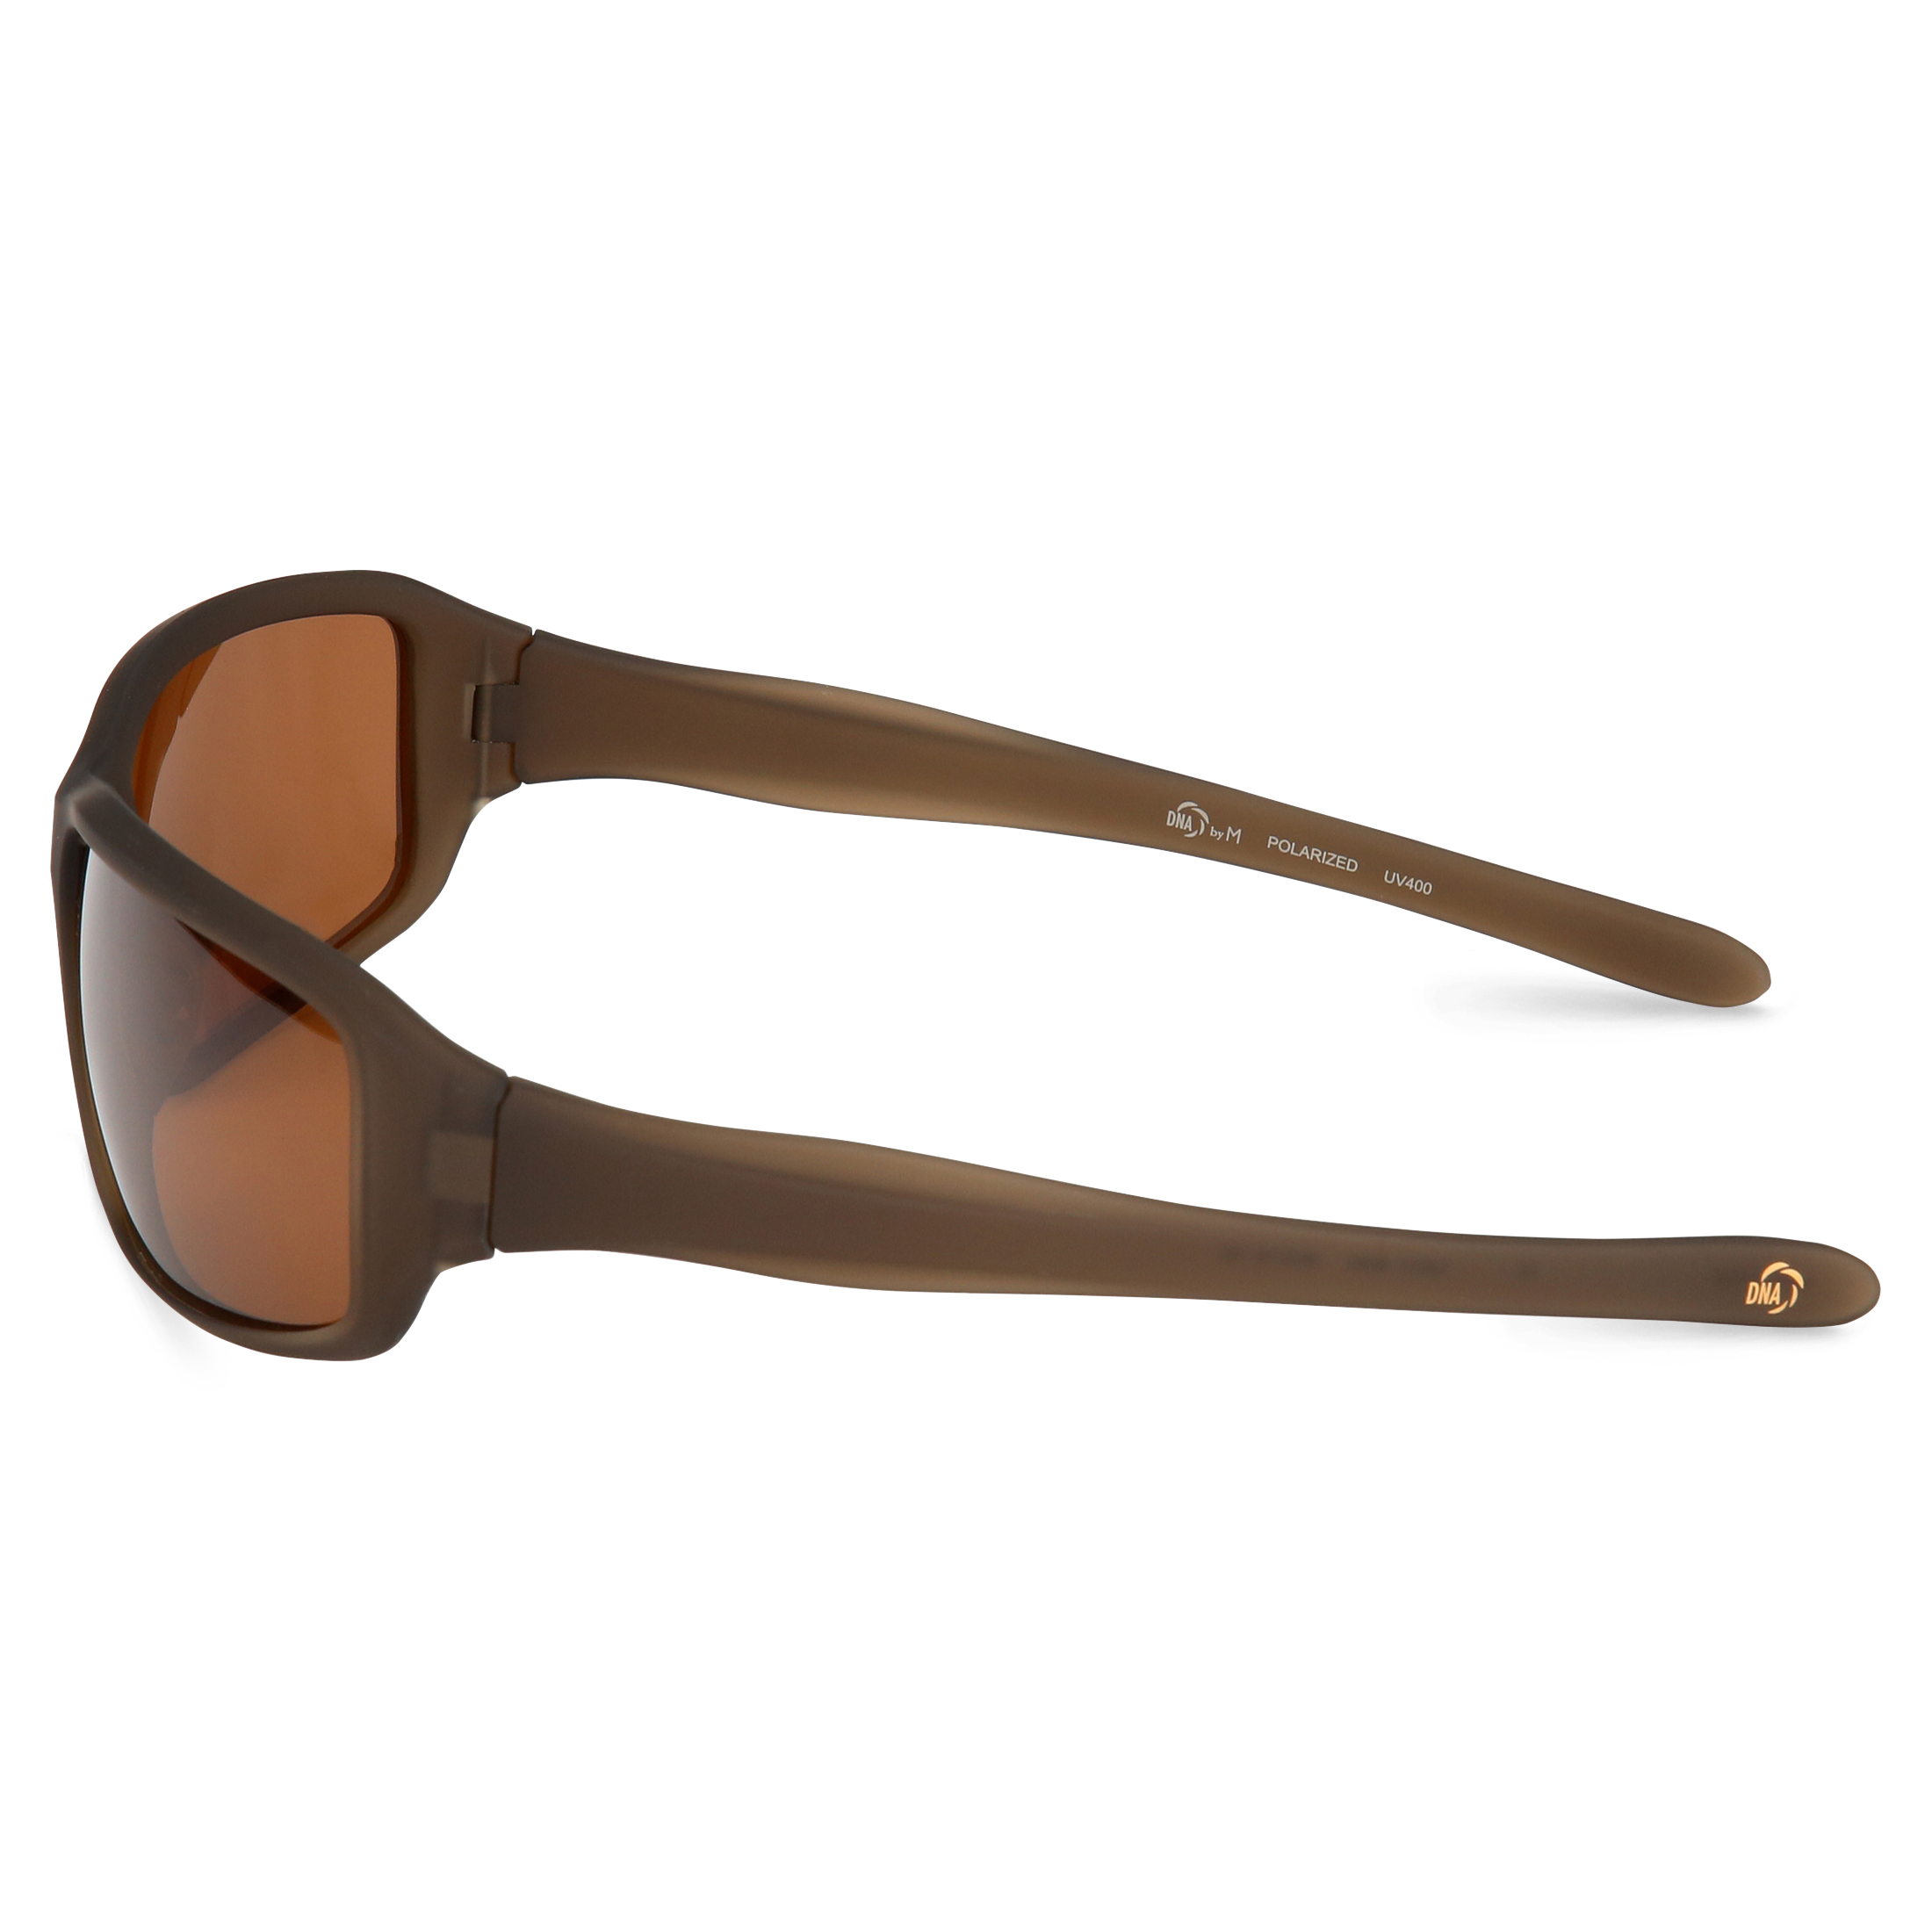 DNA Polarized Sunglasses, Unisex, A3012, Brown, 64-18-134 - image 3 of 6